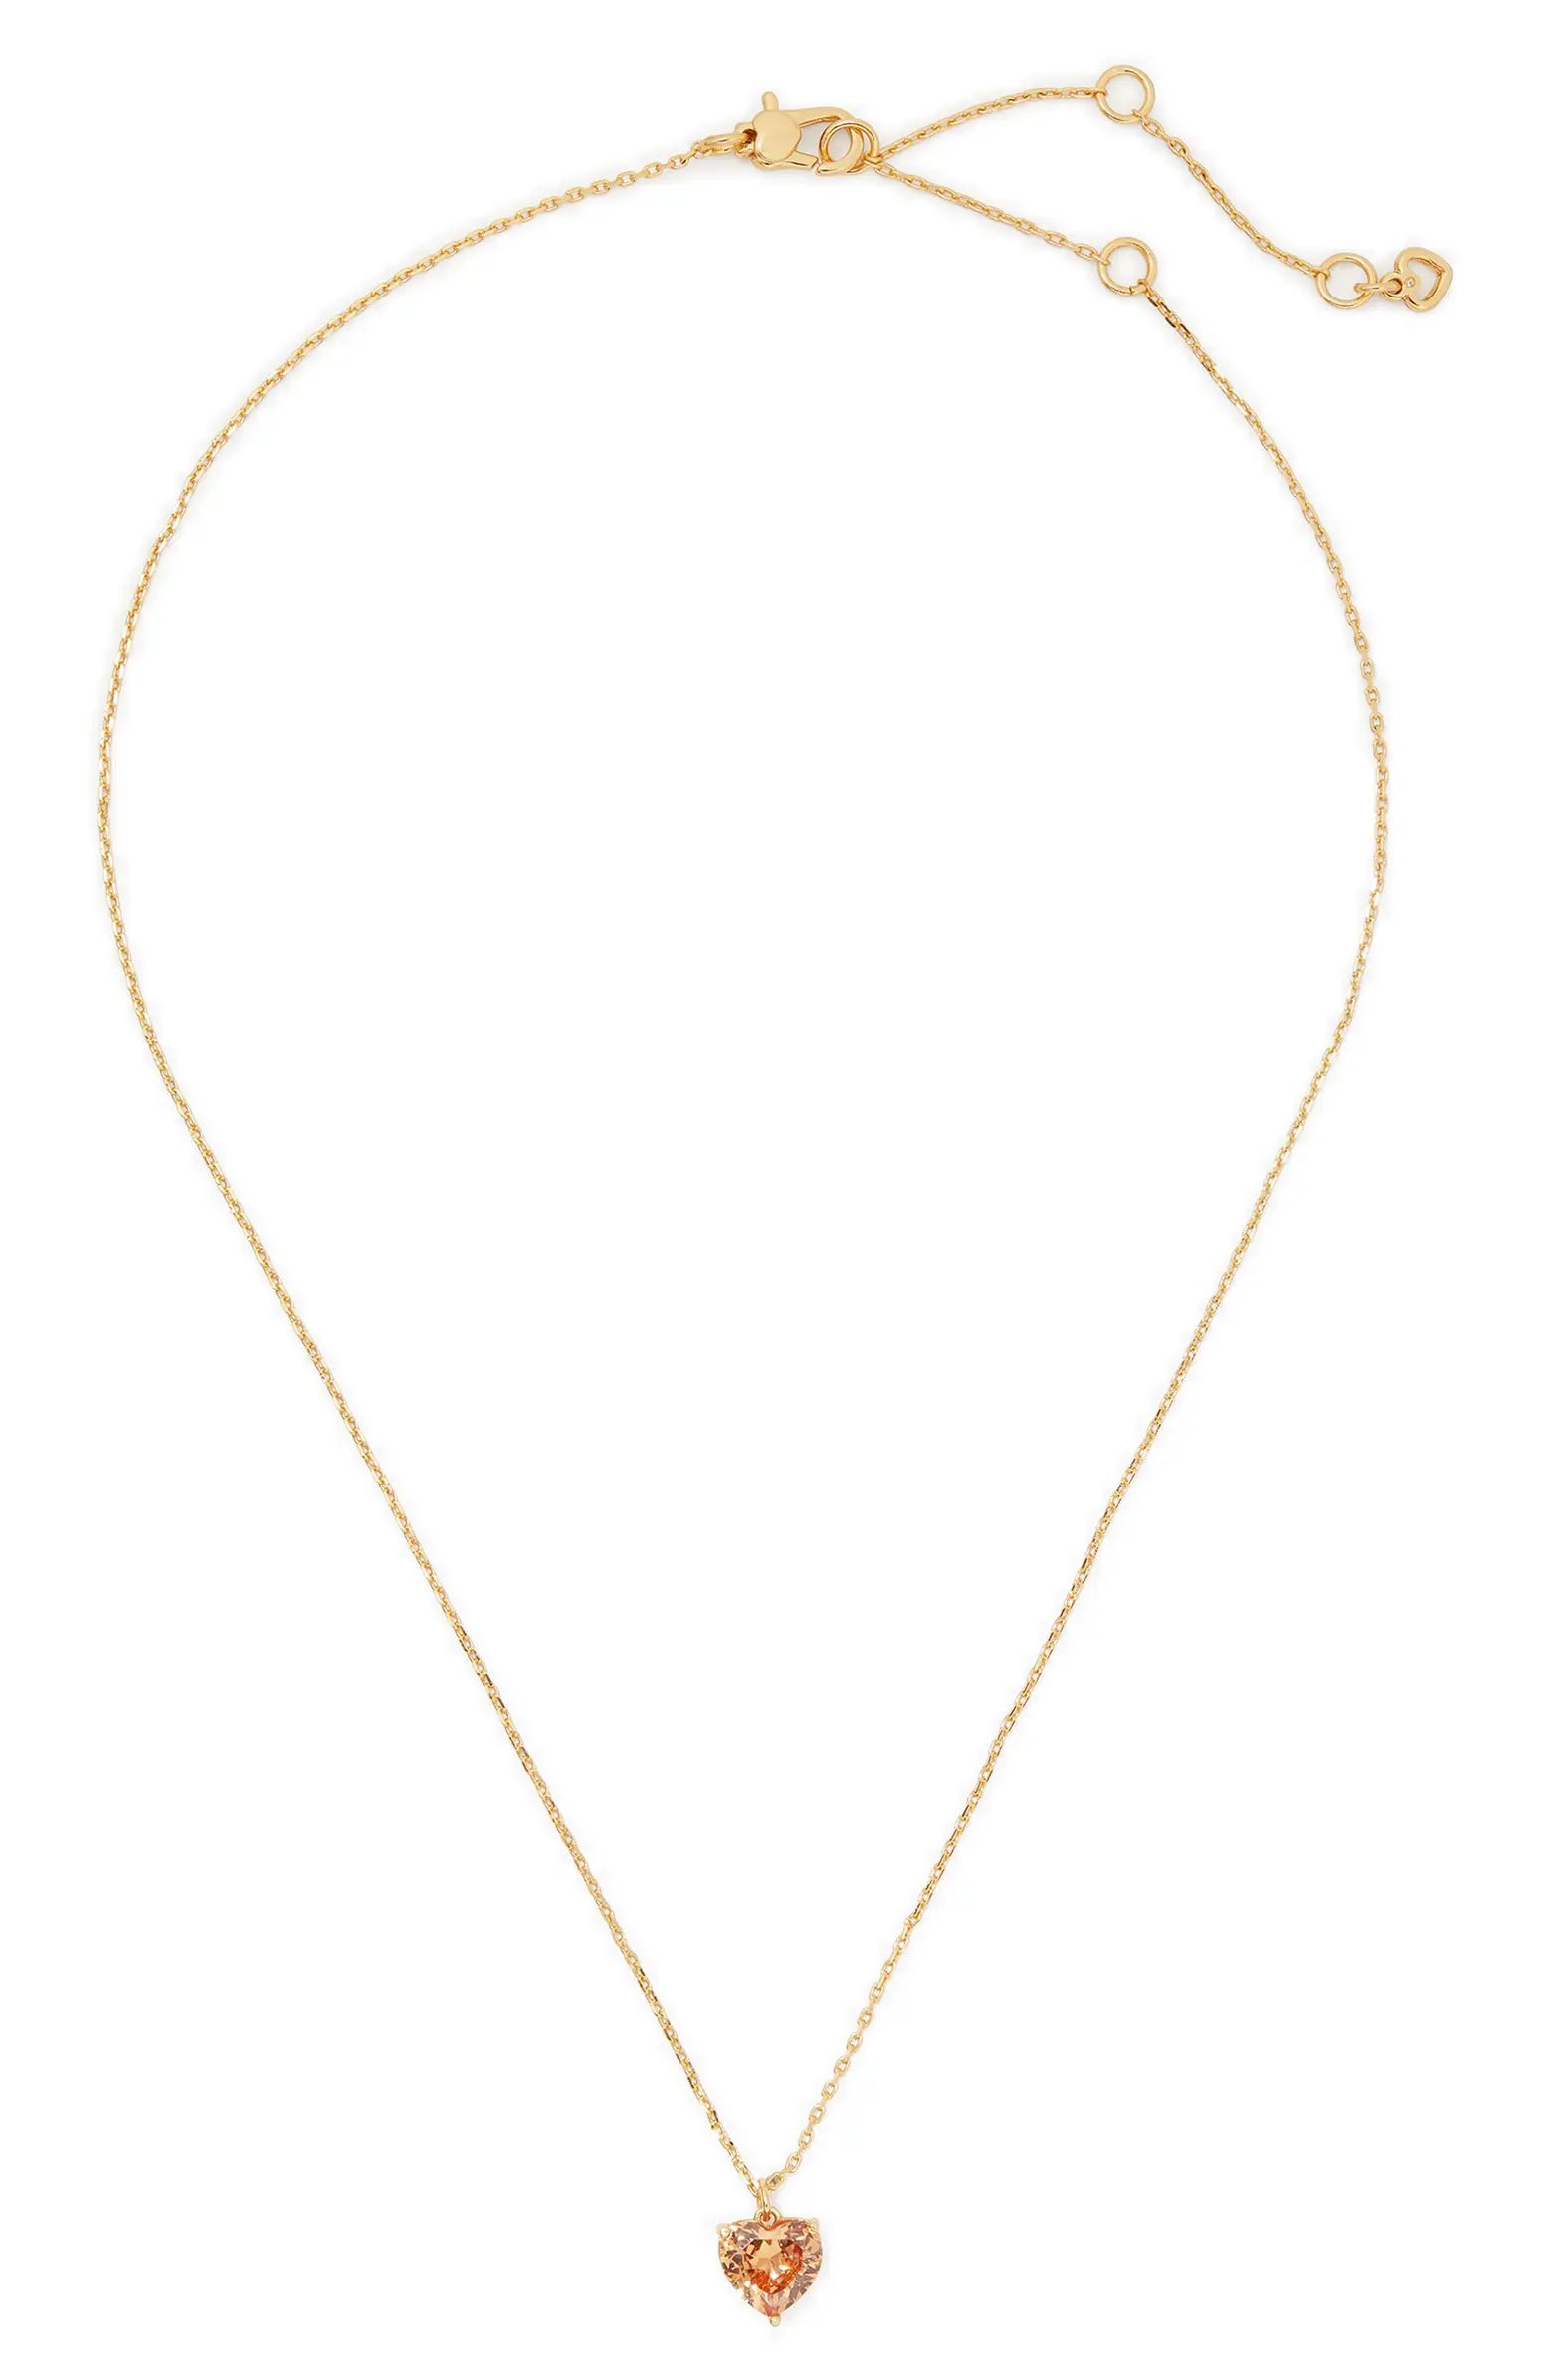 my love may heart pendant necklace | Nordstrom